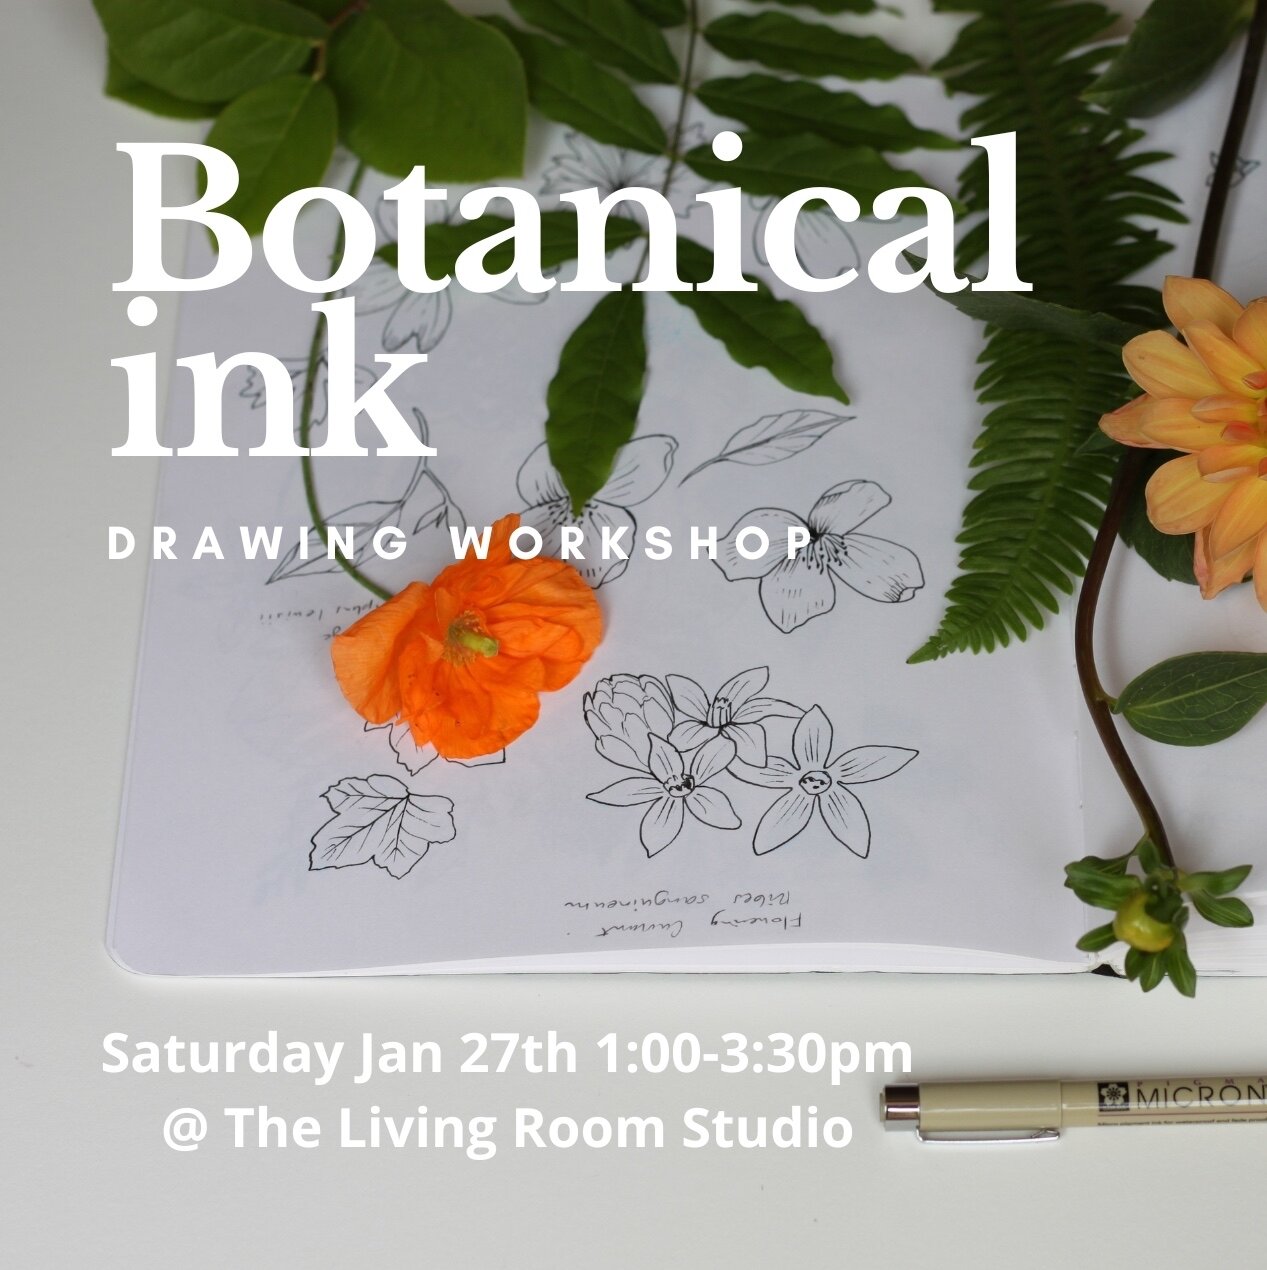 Let&rsquo;s draw! Join me for my Intro to Botanical Ink Drawing Workshop on Jan. 27th.
🌱 
⁠⁠Together we'll explore the fundamentals of drawing botanicals with a series of exercises to create value, shapes, textures, light &amp; shadow with ink. Prac